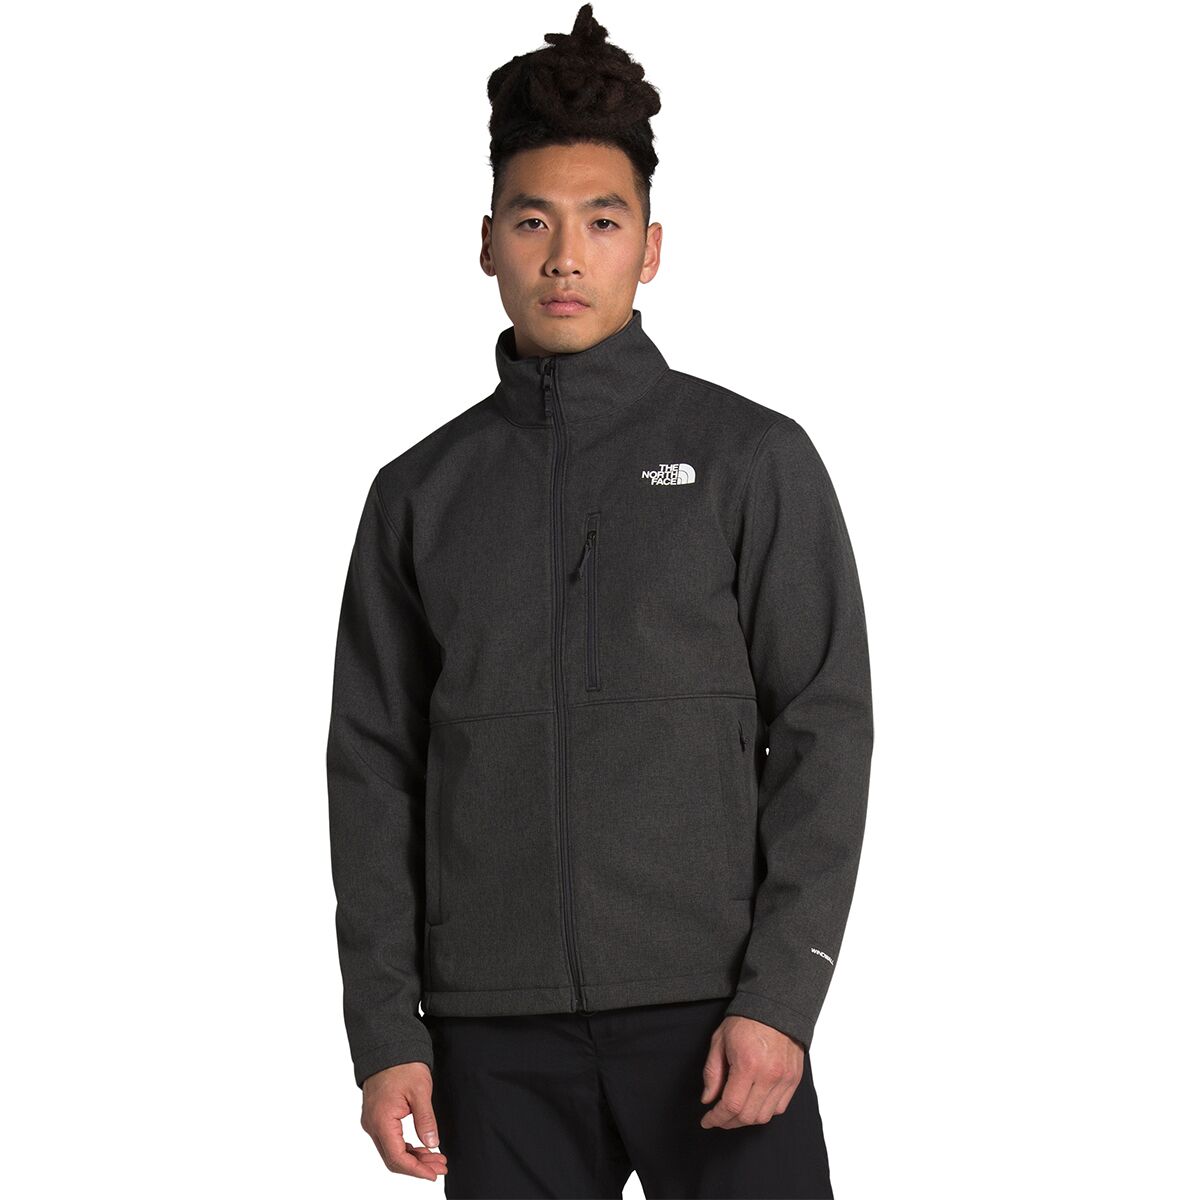 north face bionic jacket